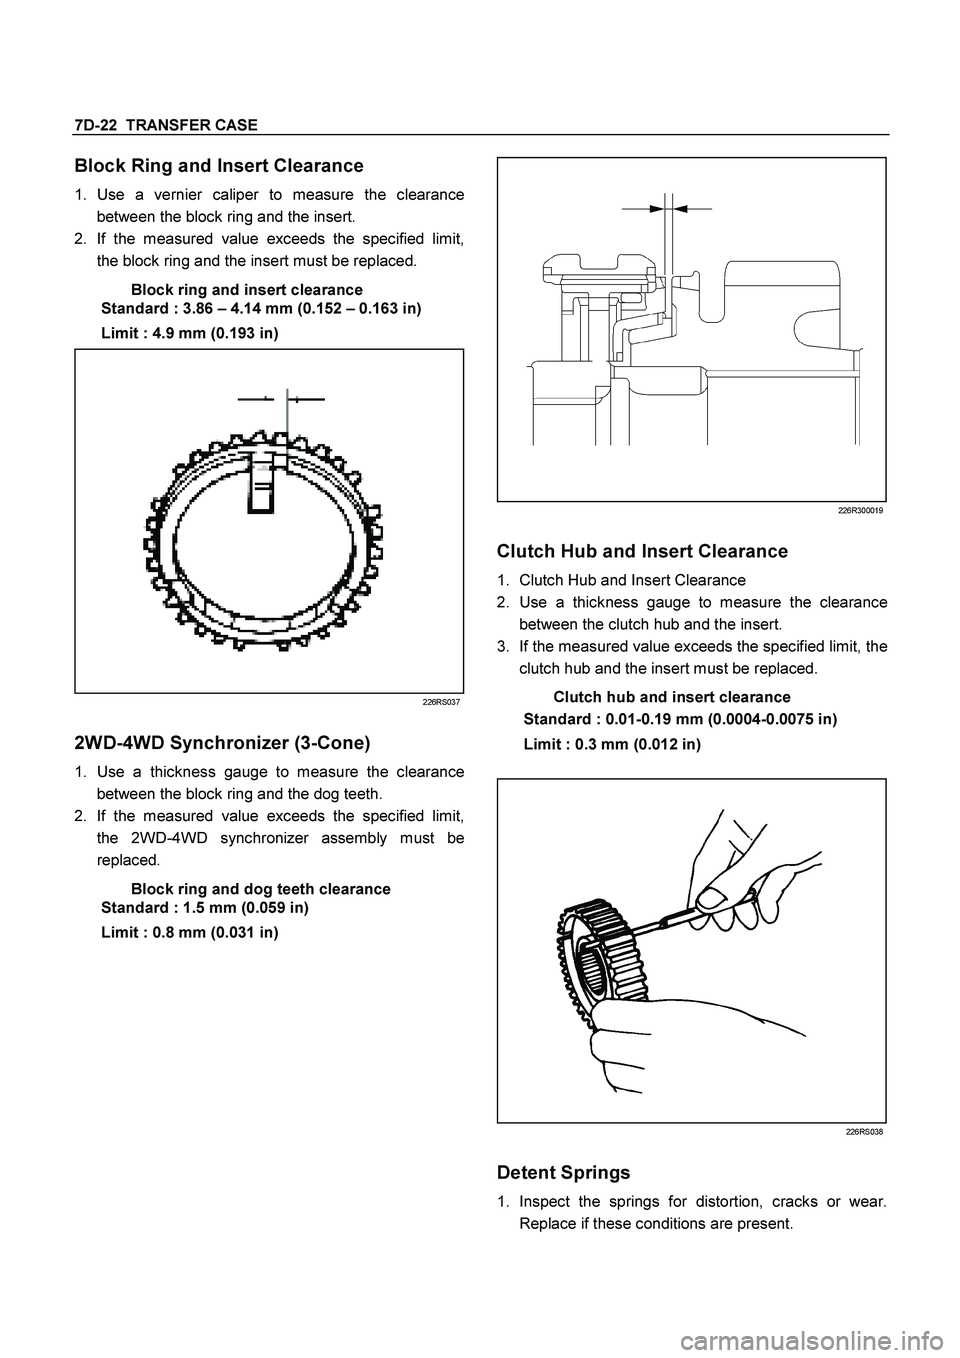 ISUZU TF SERIES 2004  Workshop Manual 7D-22  TRANSFER CASE
 
Block Ring and Insert Clearance 
1. 
Use a vernier caliper to measure the clearance 
between the block ring and the insert. 
2. 
If the measured value exceeds the specified limi